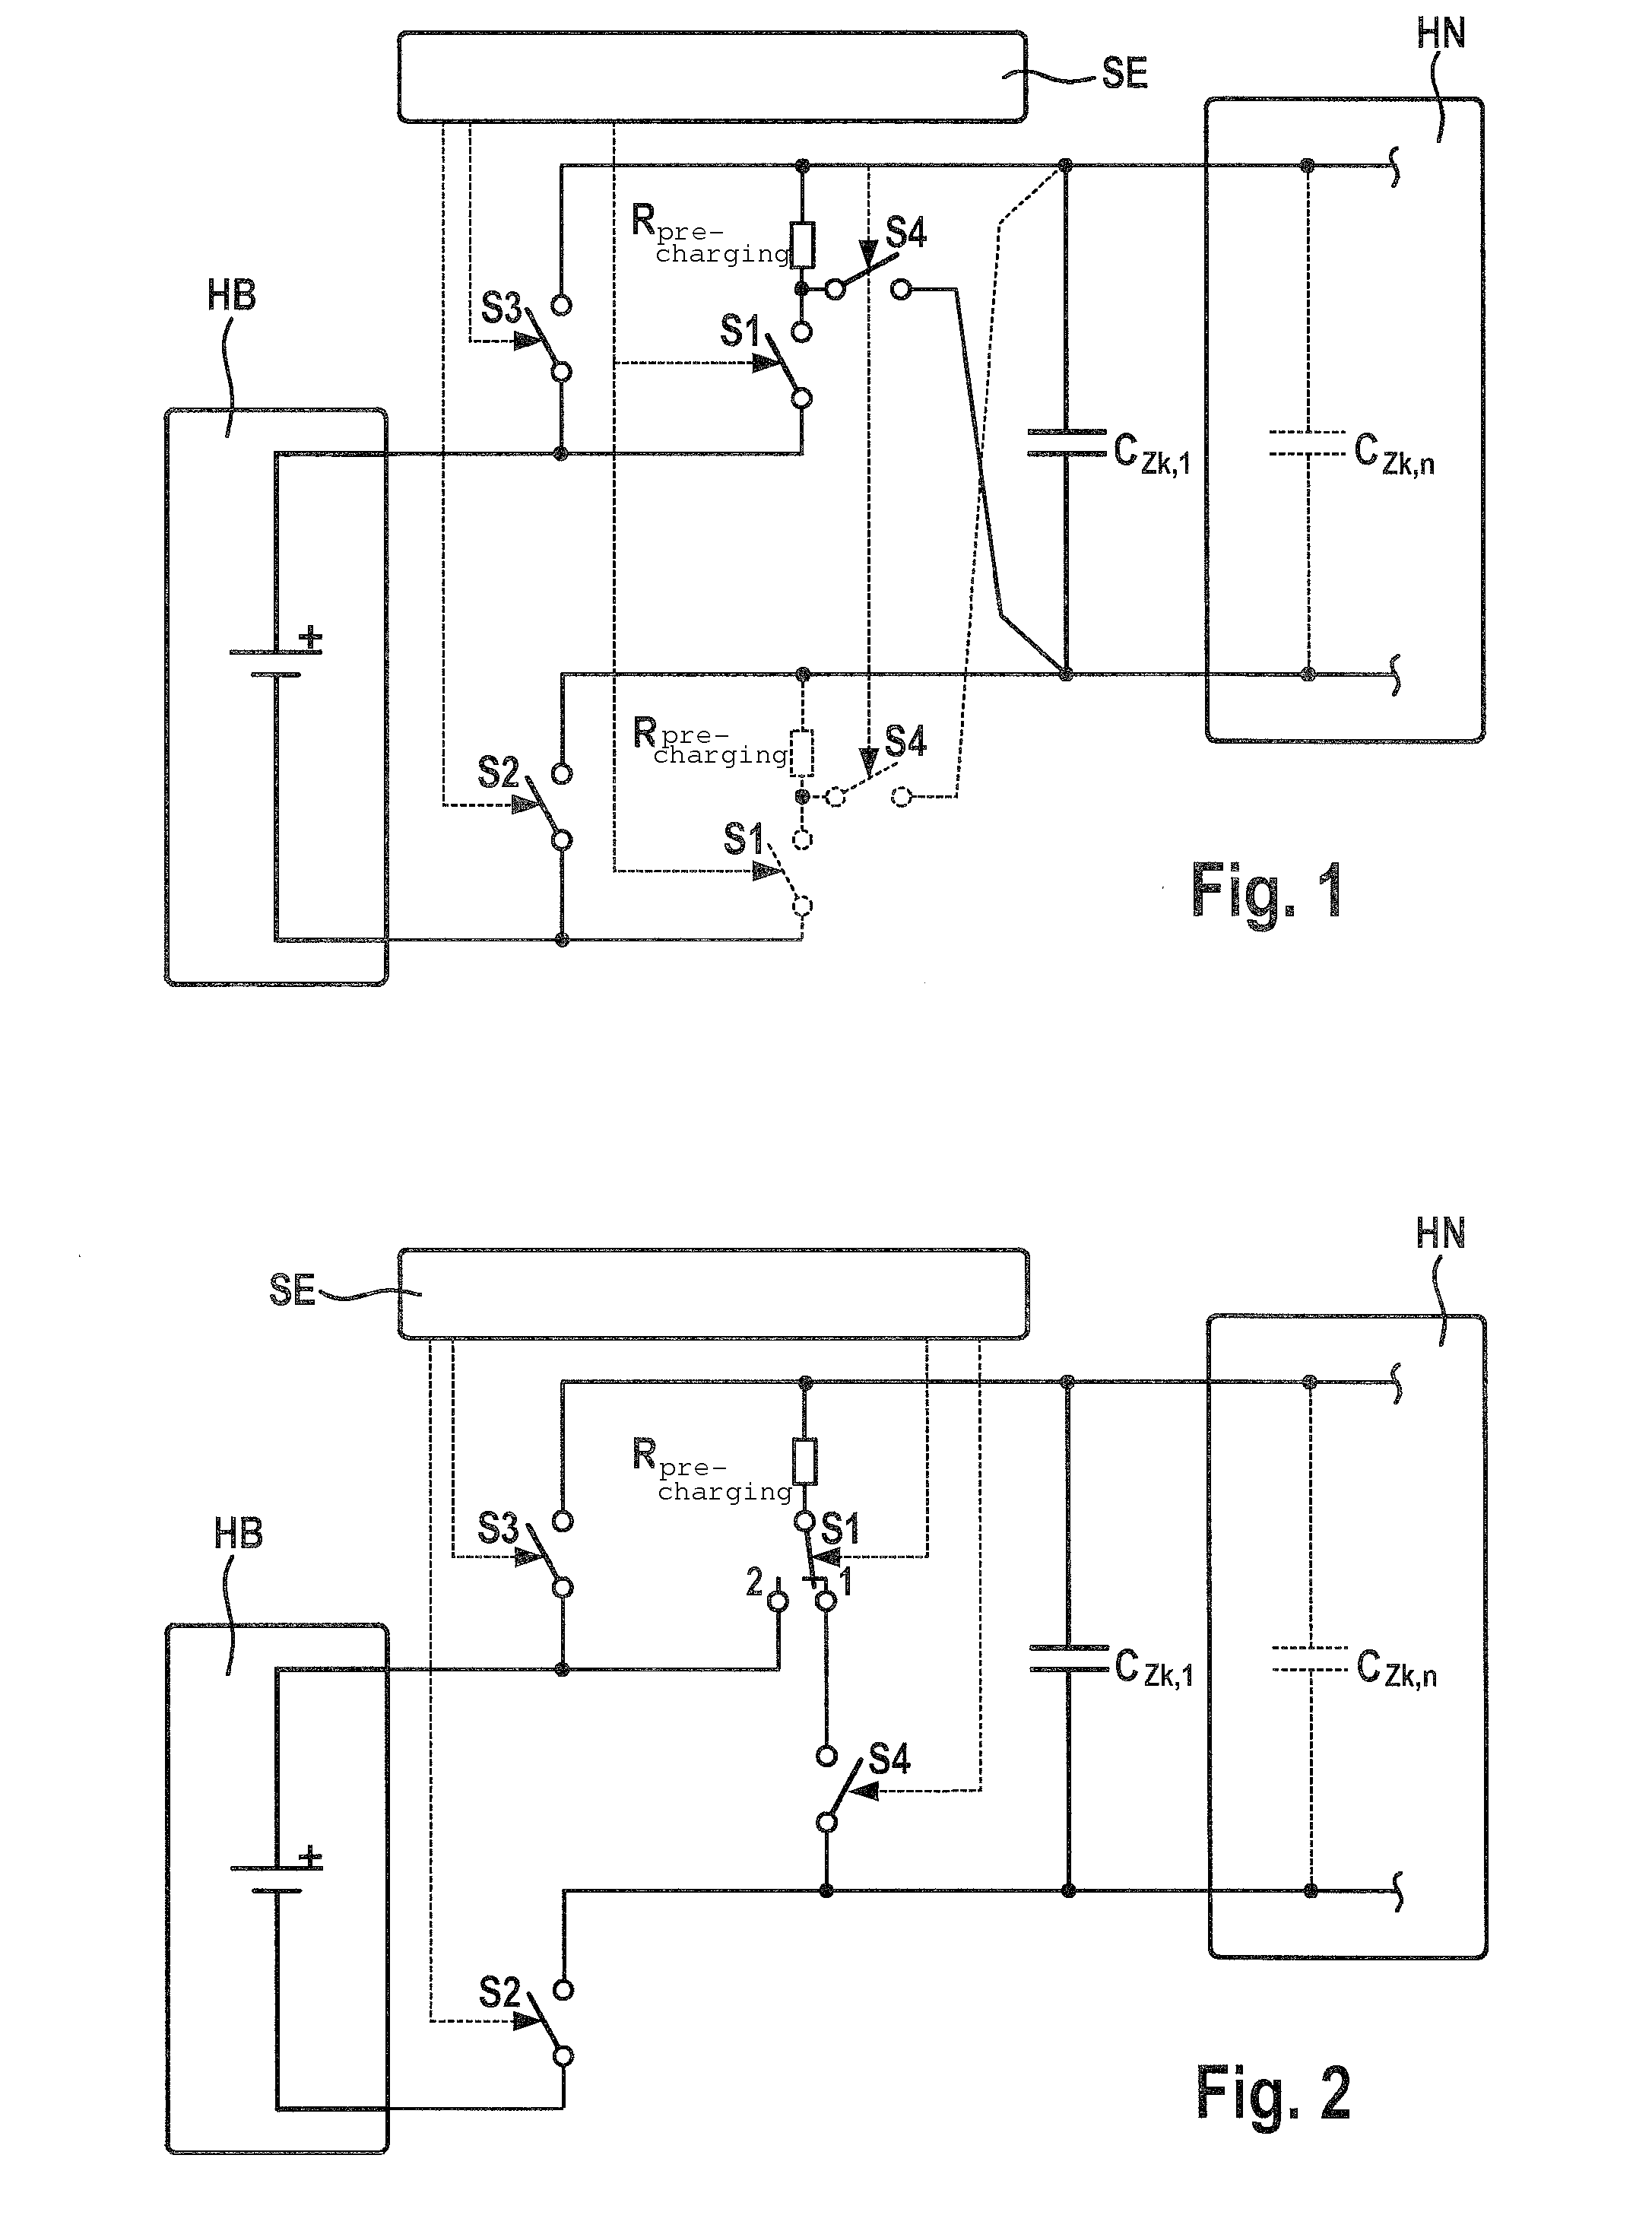 Method and Device for Limiting the Starting Current and for Discharging the DC Voltage Intermediate Circuit